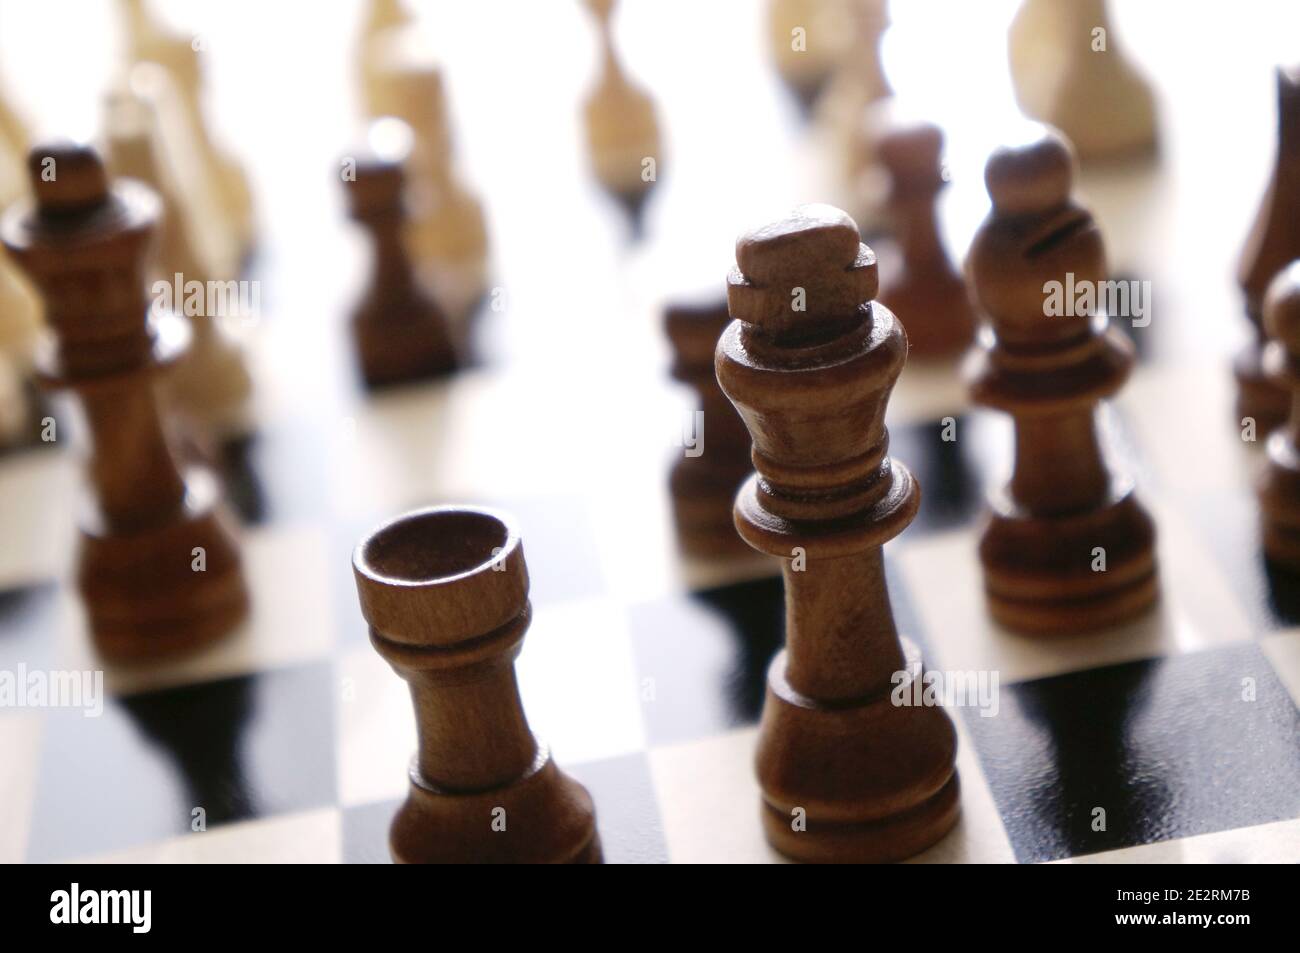 Wood chess pieces on a board Stock Photo